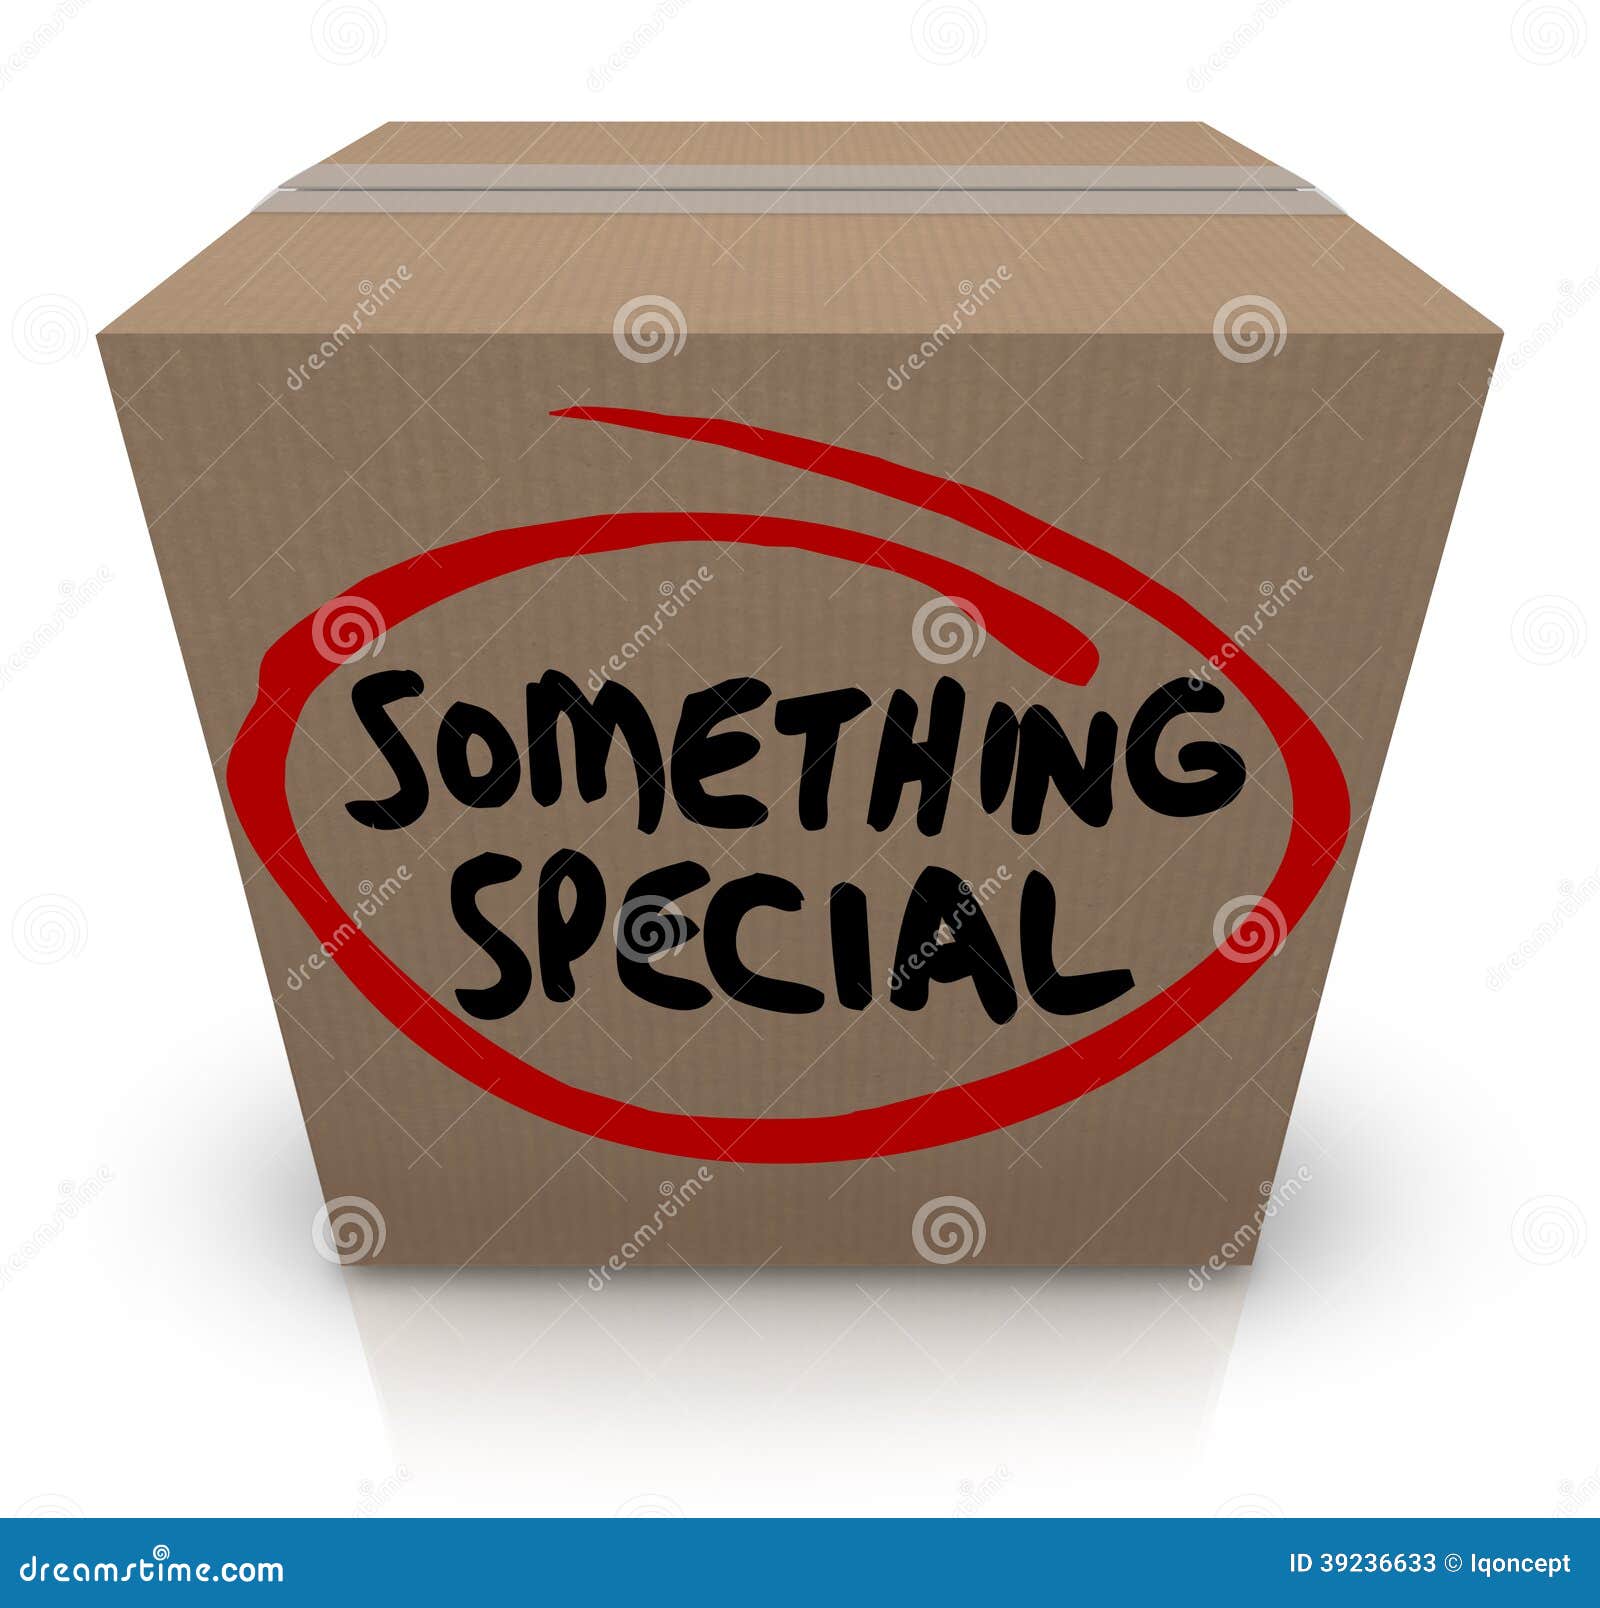 something special cardboard box gift delivery unique contents